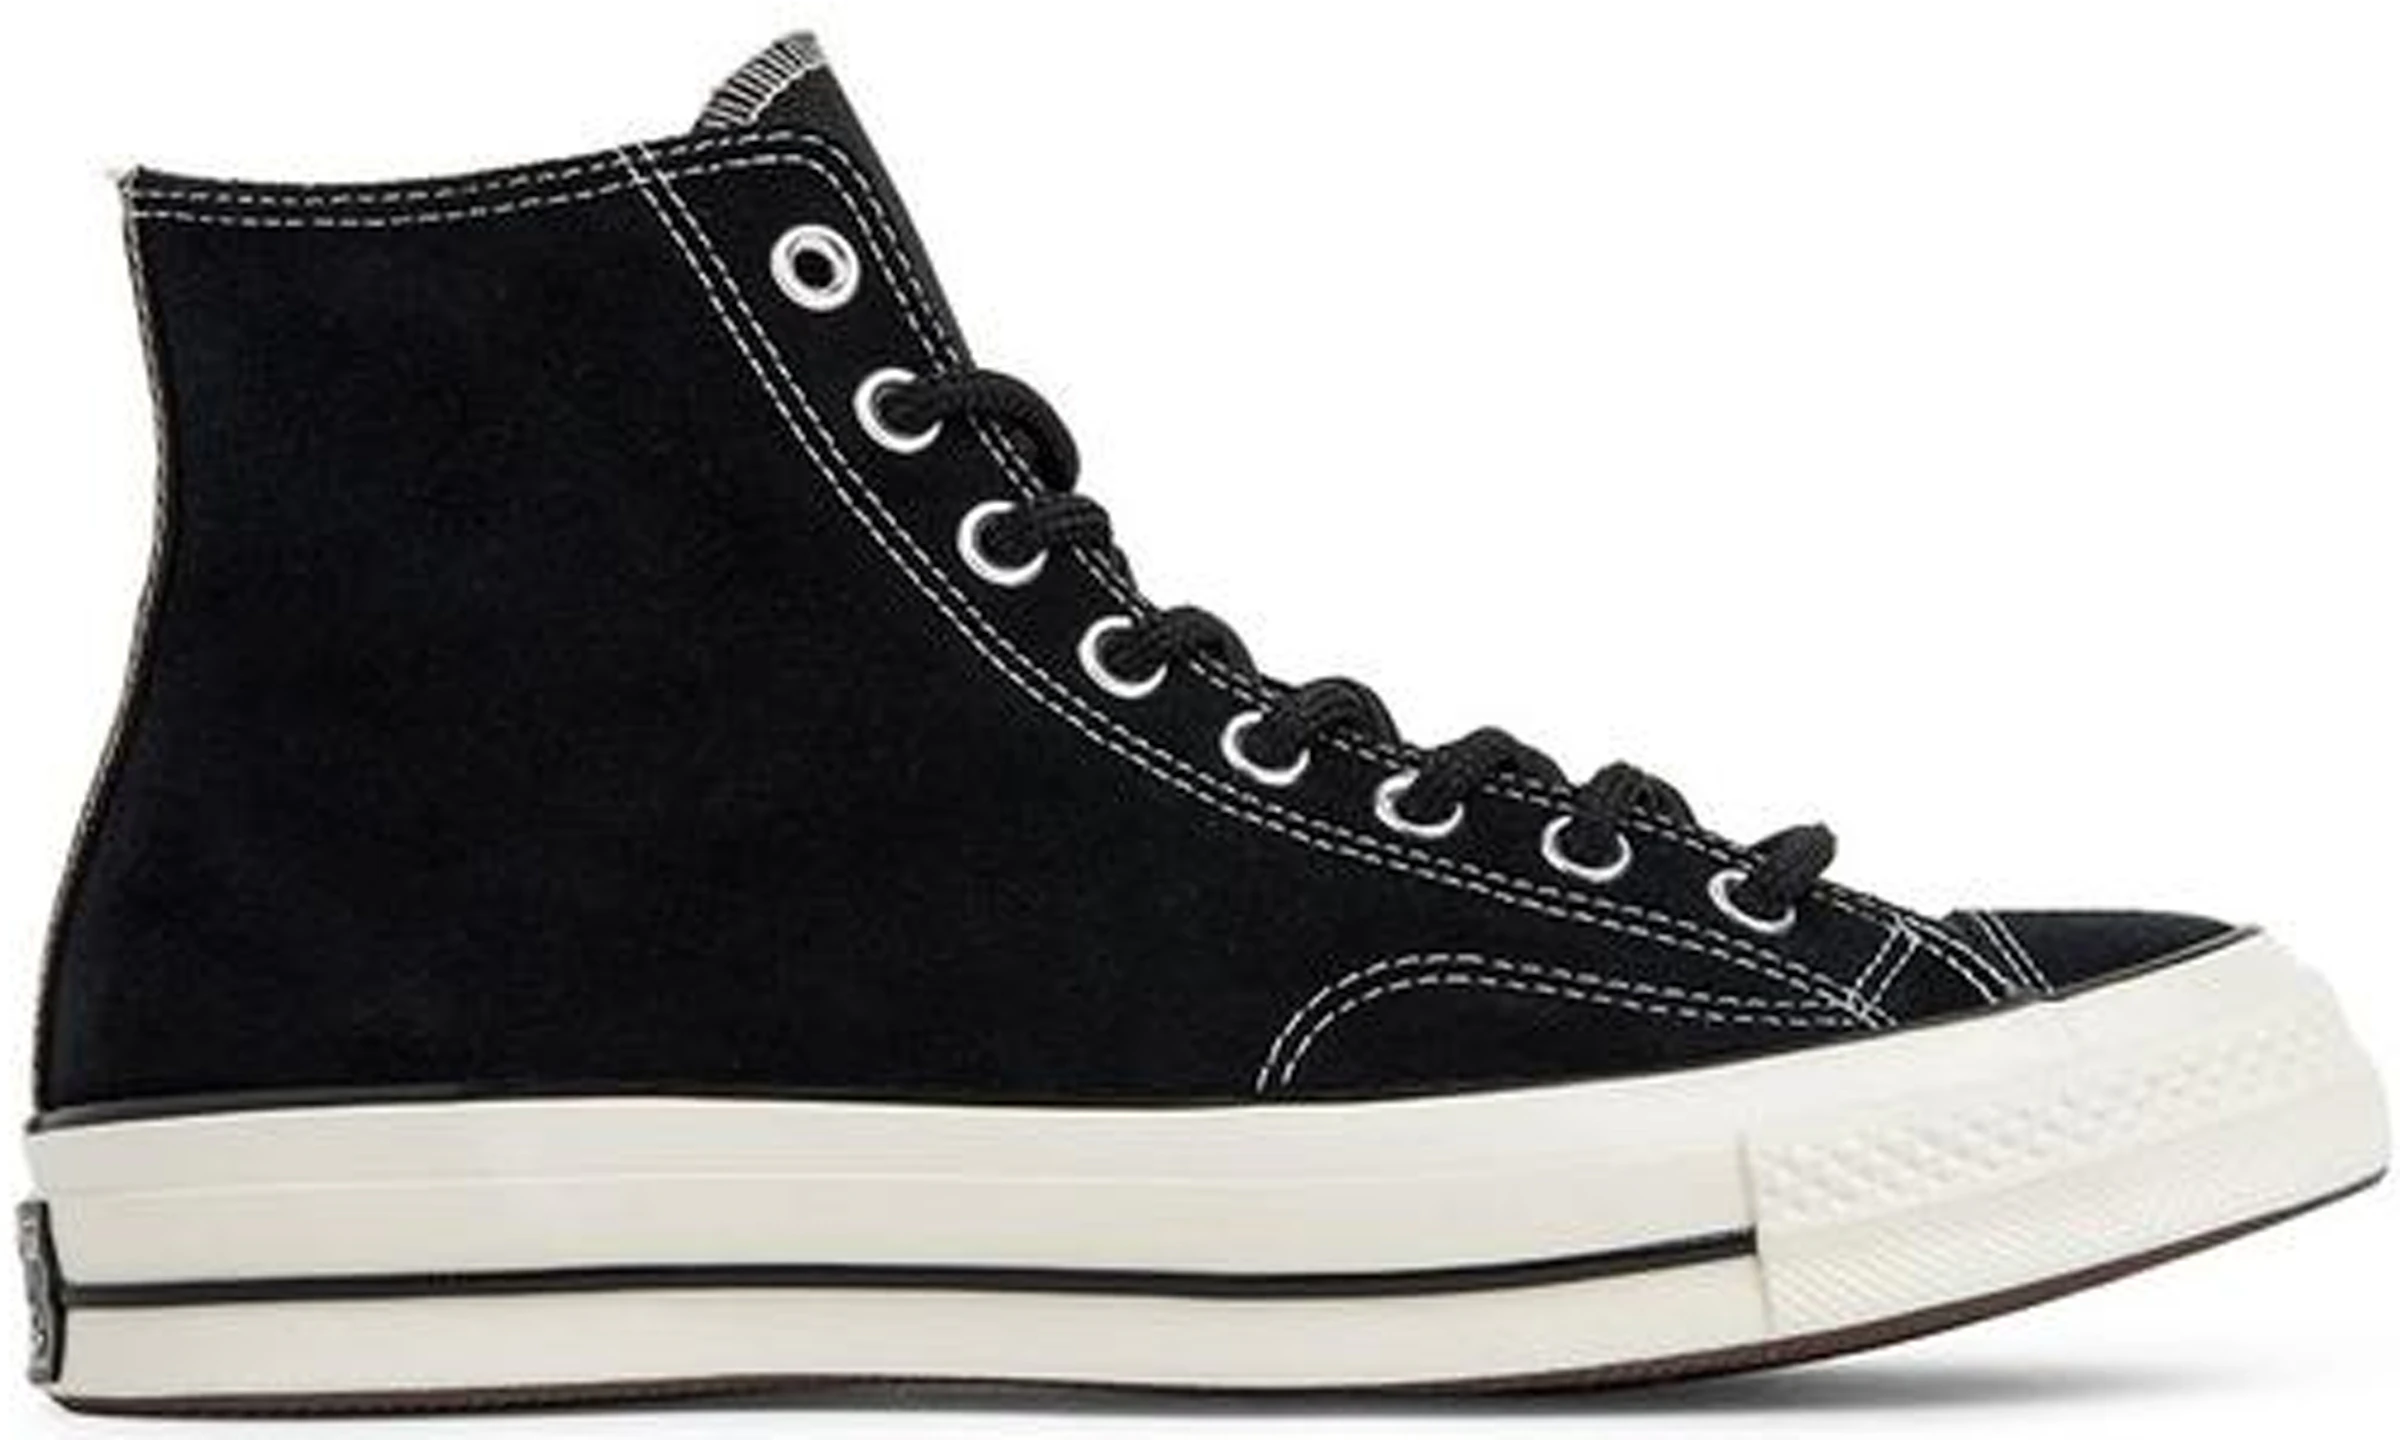 Converse Chuck Taylor All-Star 70 Hi Suede Pack Black - 162373C -